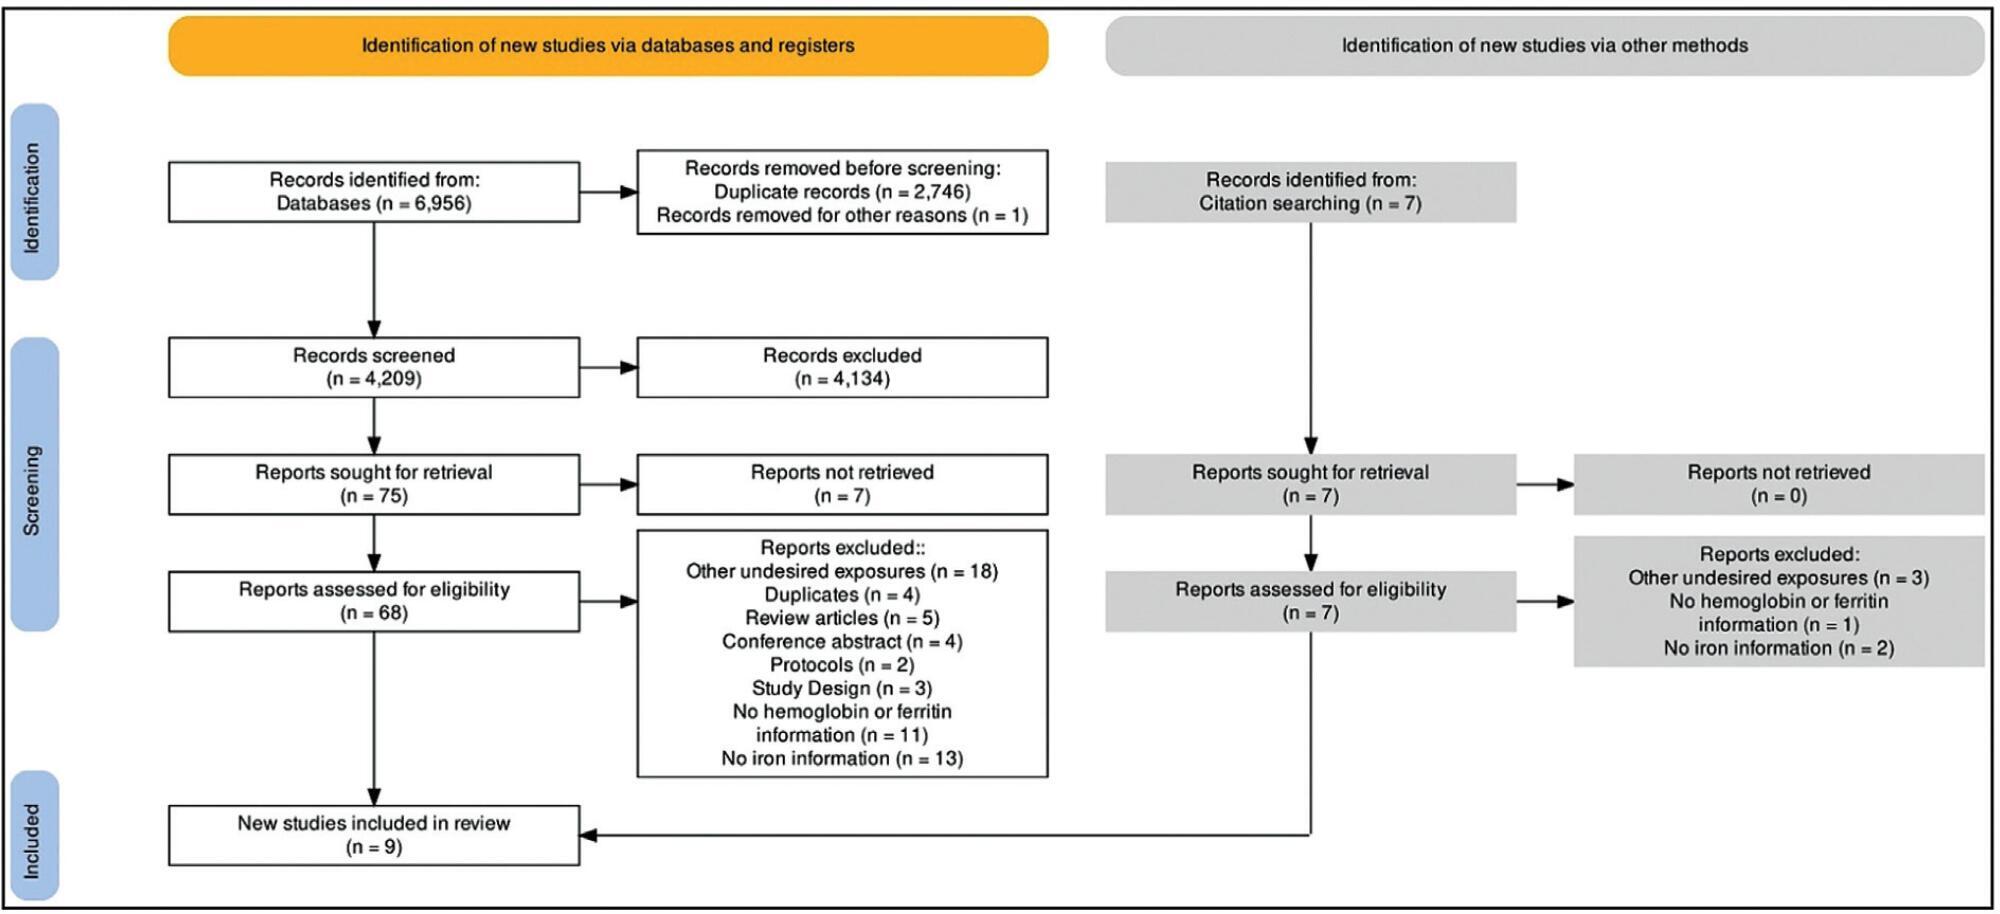 Iron Salts, High Levels of Hemoglobin and Ferritin in Pregnancy, and Development of Gestational Diabetes: A Systematic Review